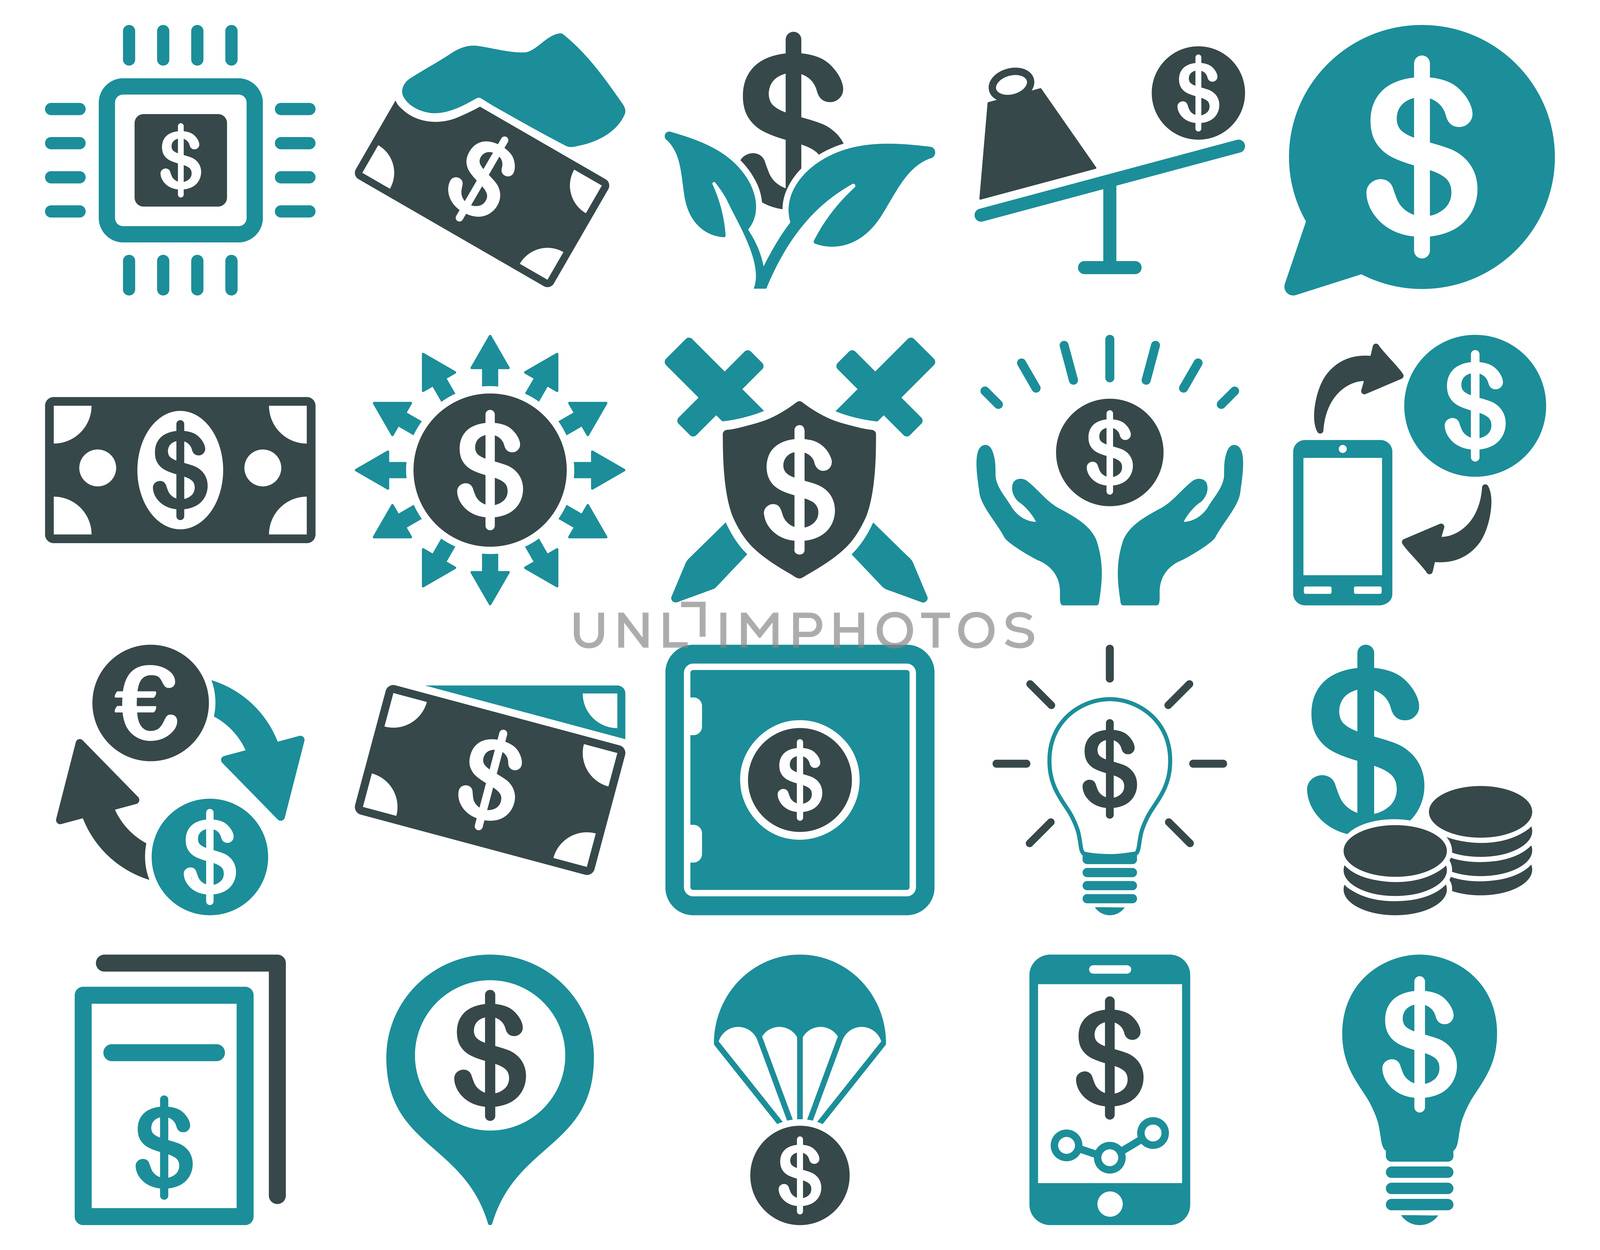 Dollar Icon Set. These flat bicolor icons use soft blue colors. Raster images are isolated on a white background.